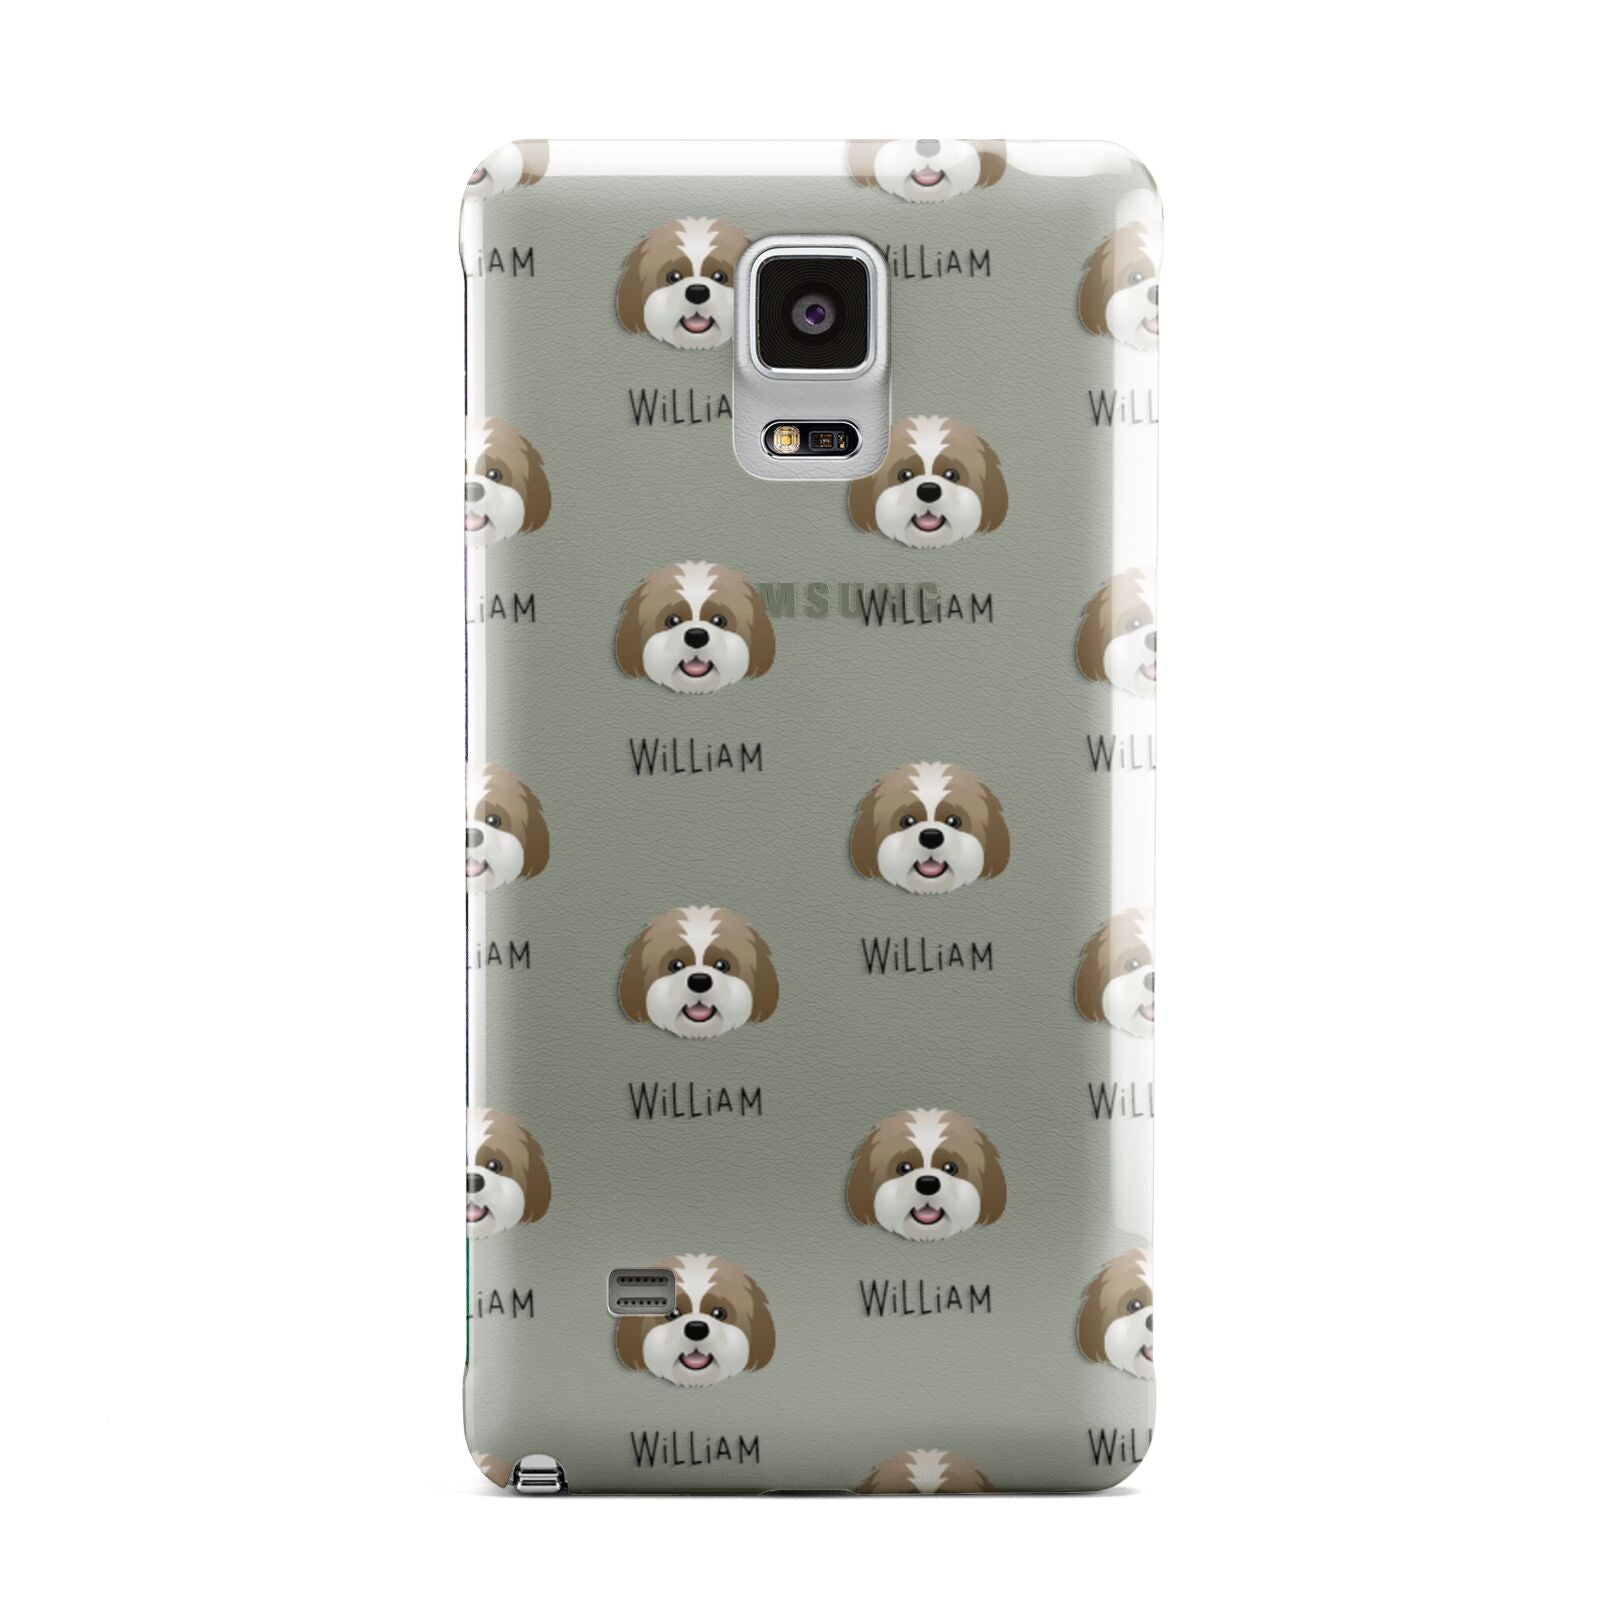 Lhatese Icon with Name Samsung Galaxy Note 4 Case